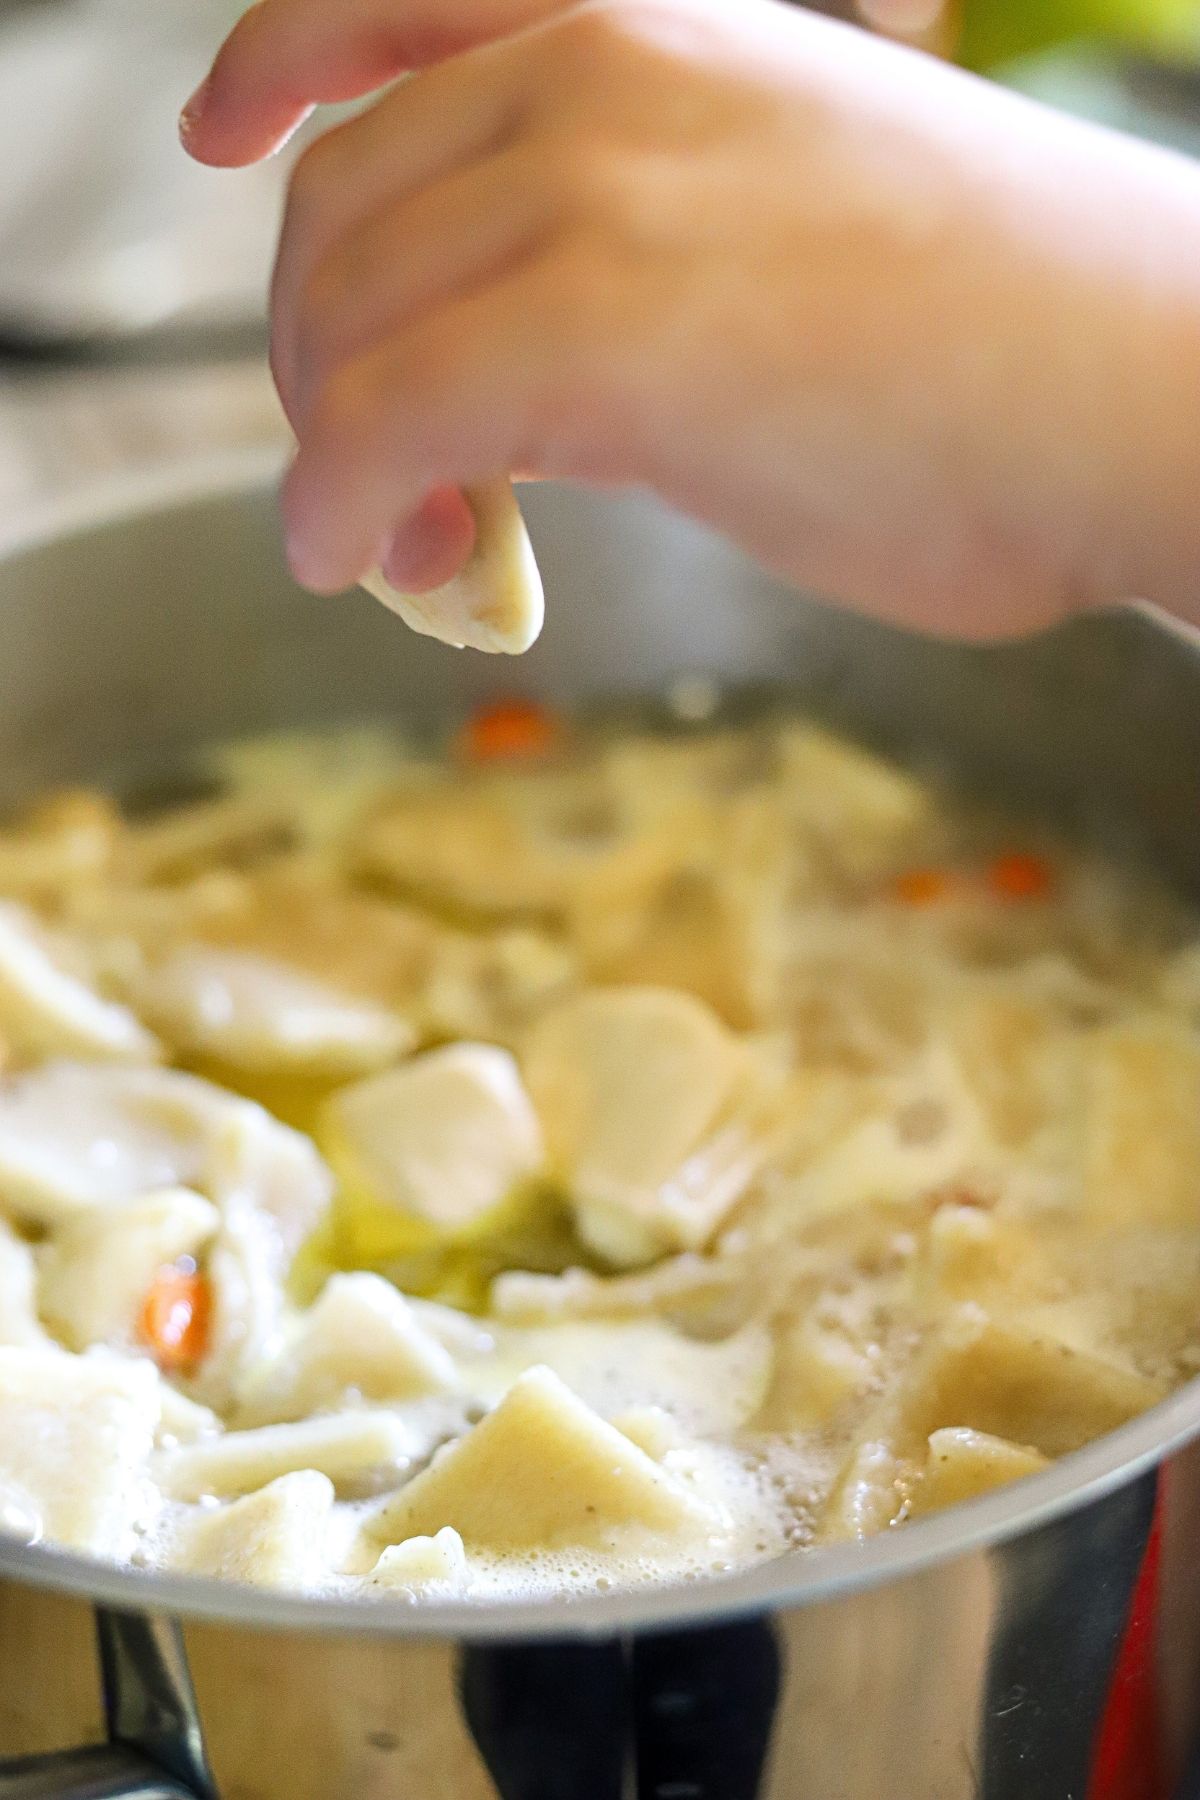 A child's hand dropping a rolled dumpling into a pot of boiling chicken and dumplings